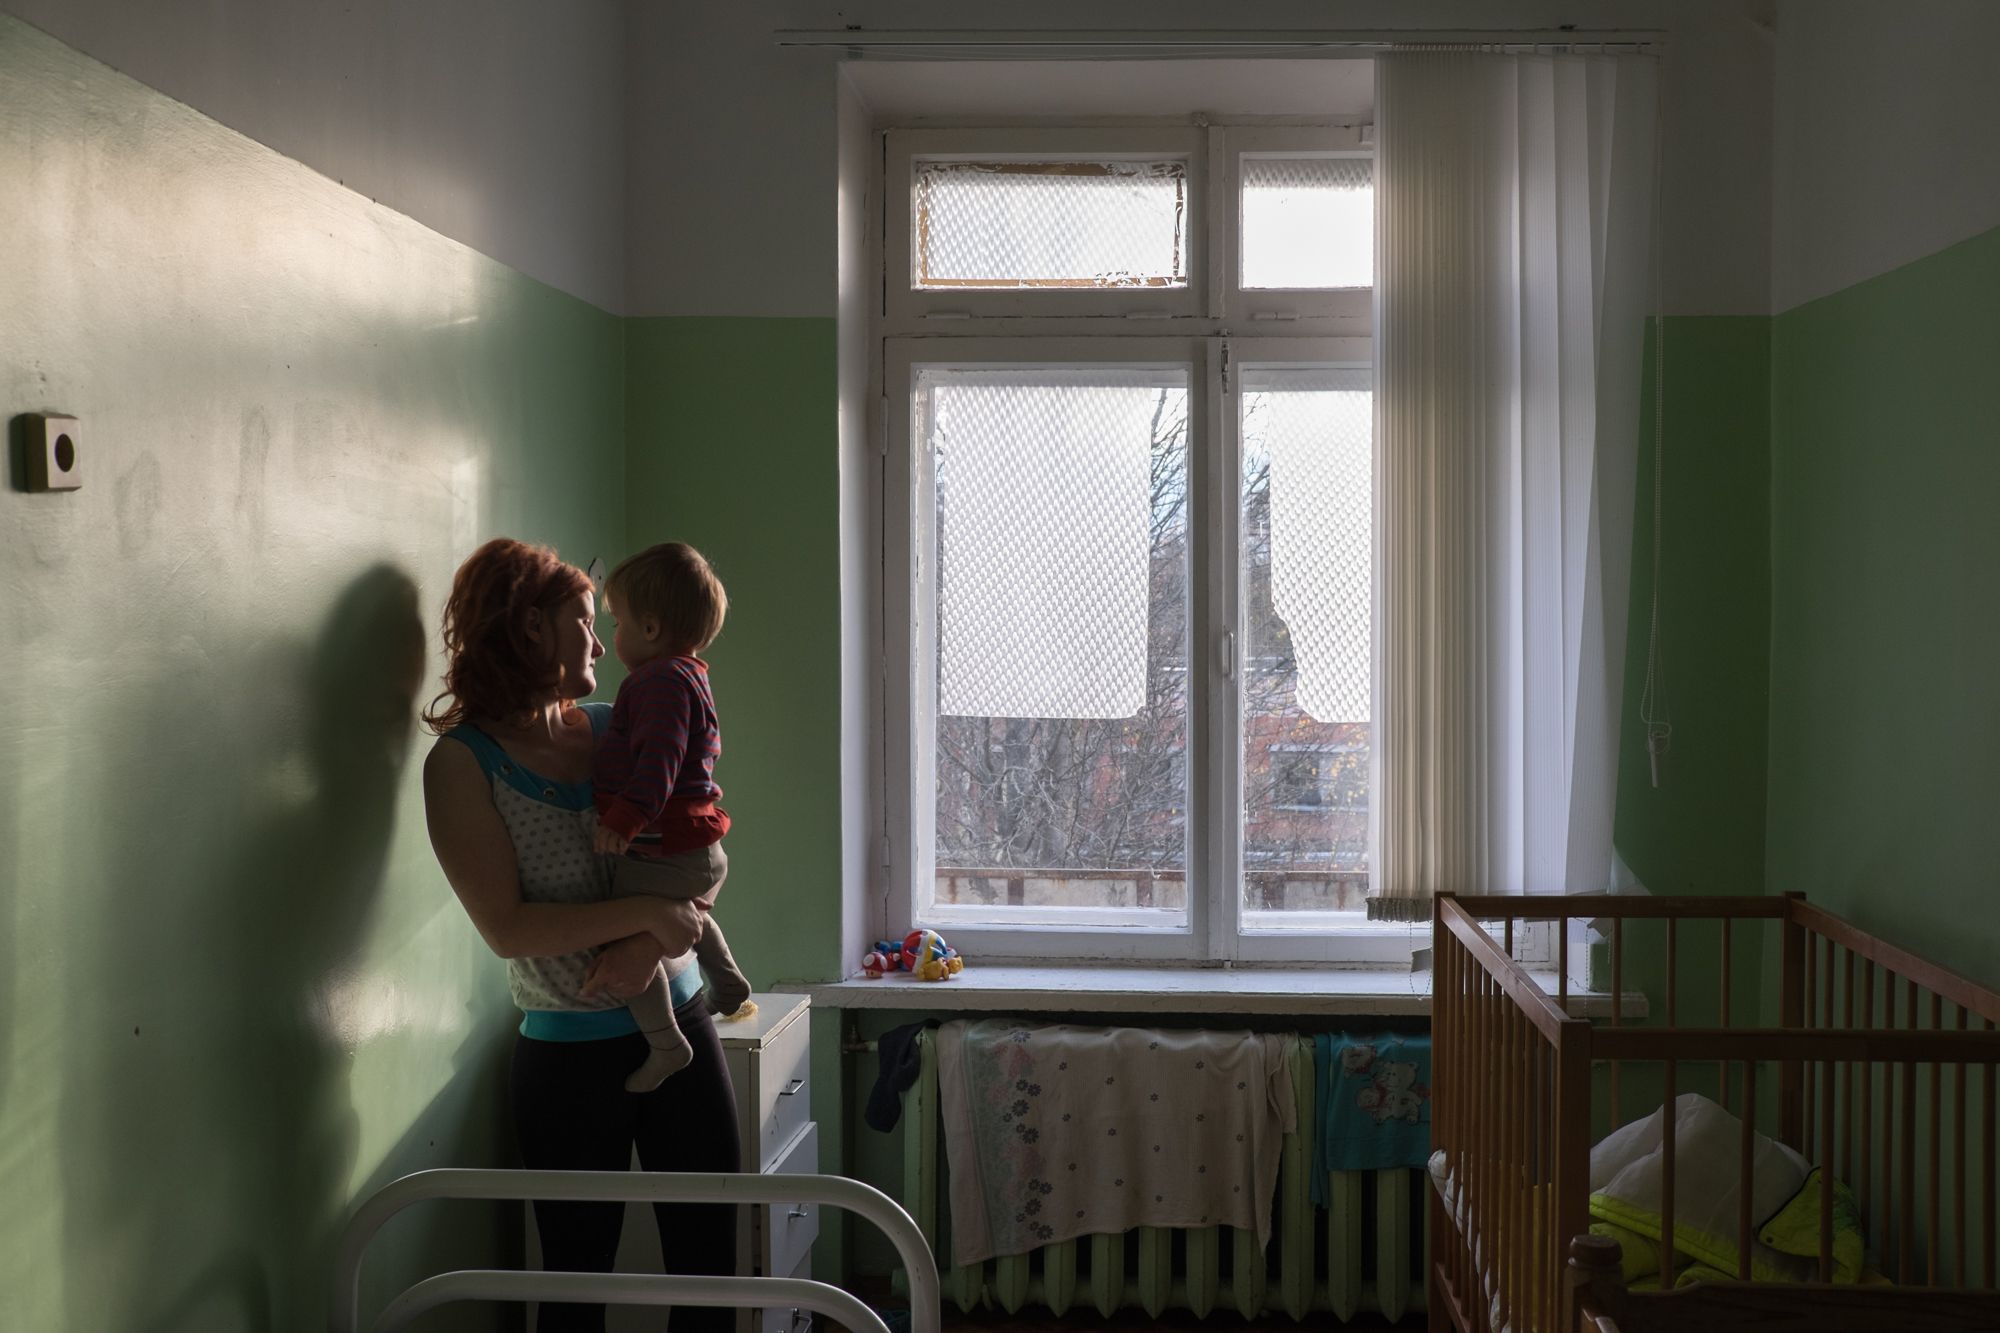 Elena and her son are staying at a hospital before handing the child to an orphanage. Image by Anastasia Rudenko. Russia, 2017.